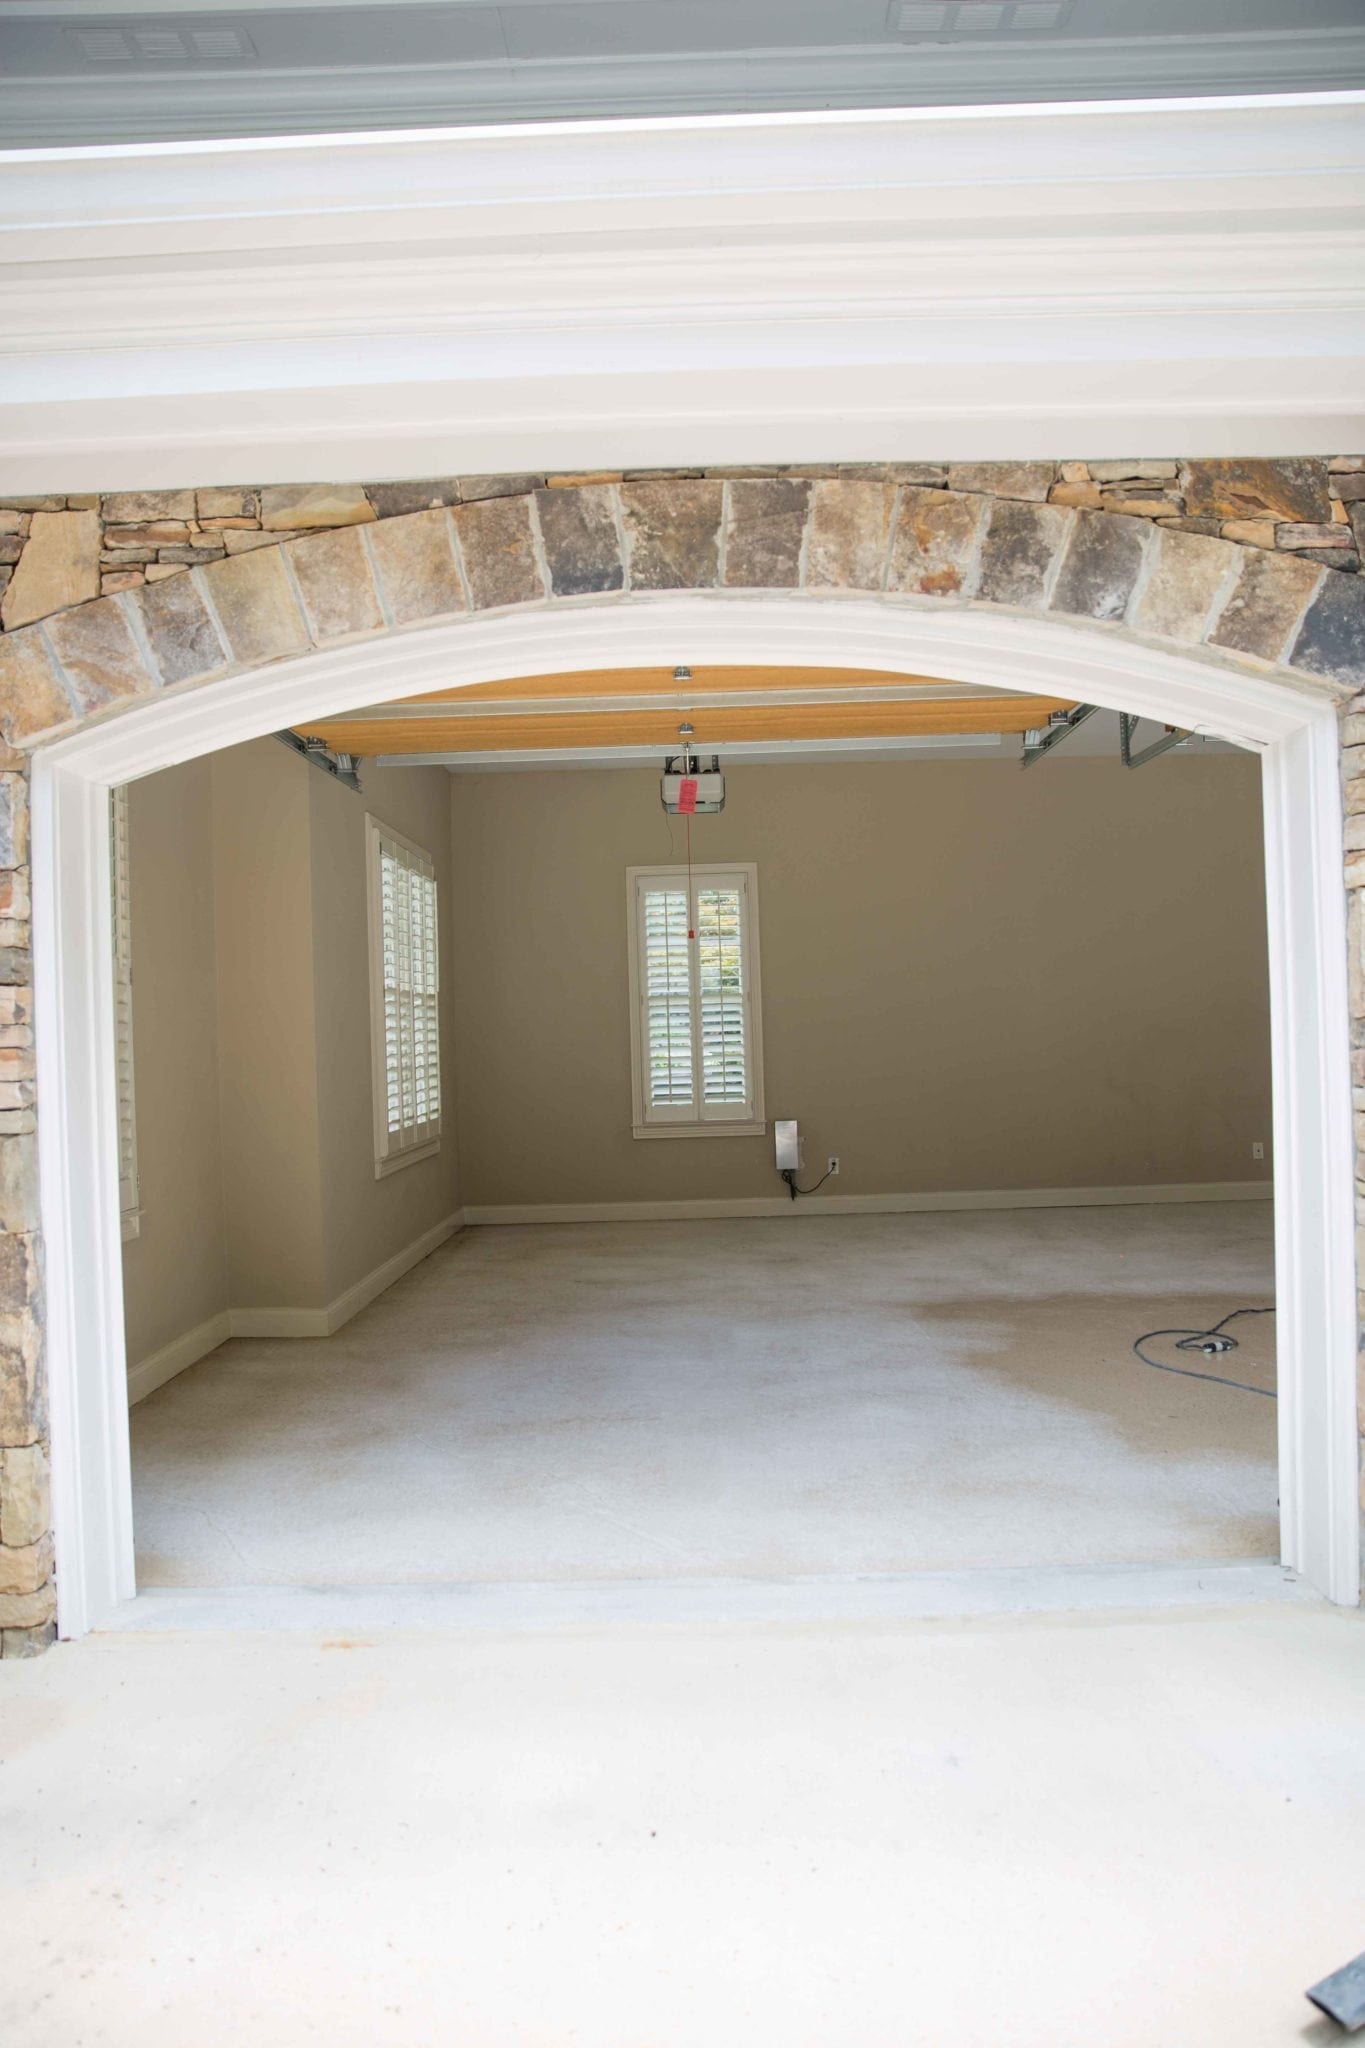 How to install a garage floor. What to look for in a professional garage floor installer.